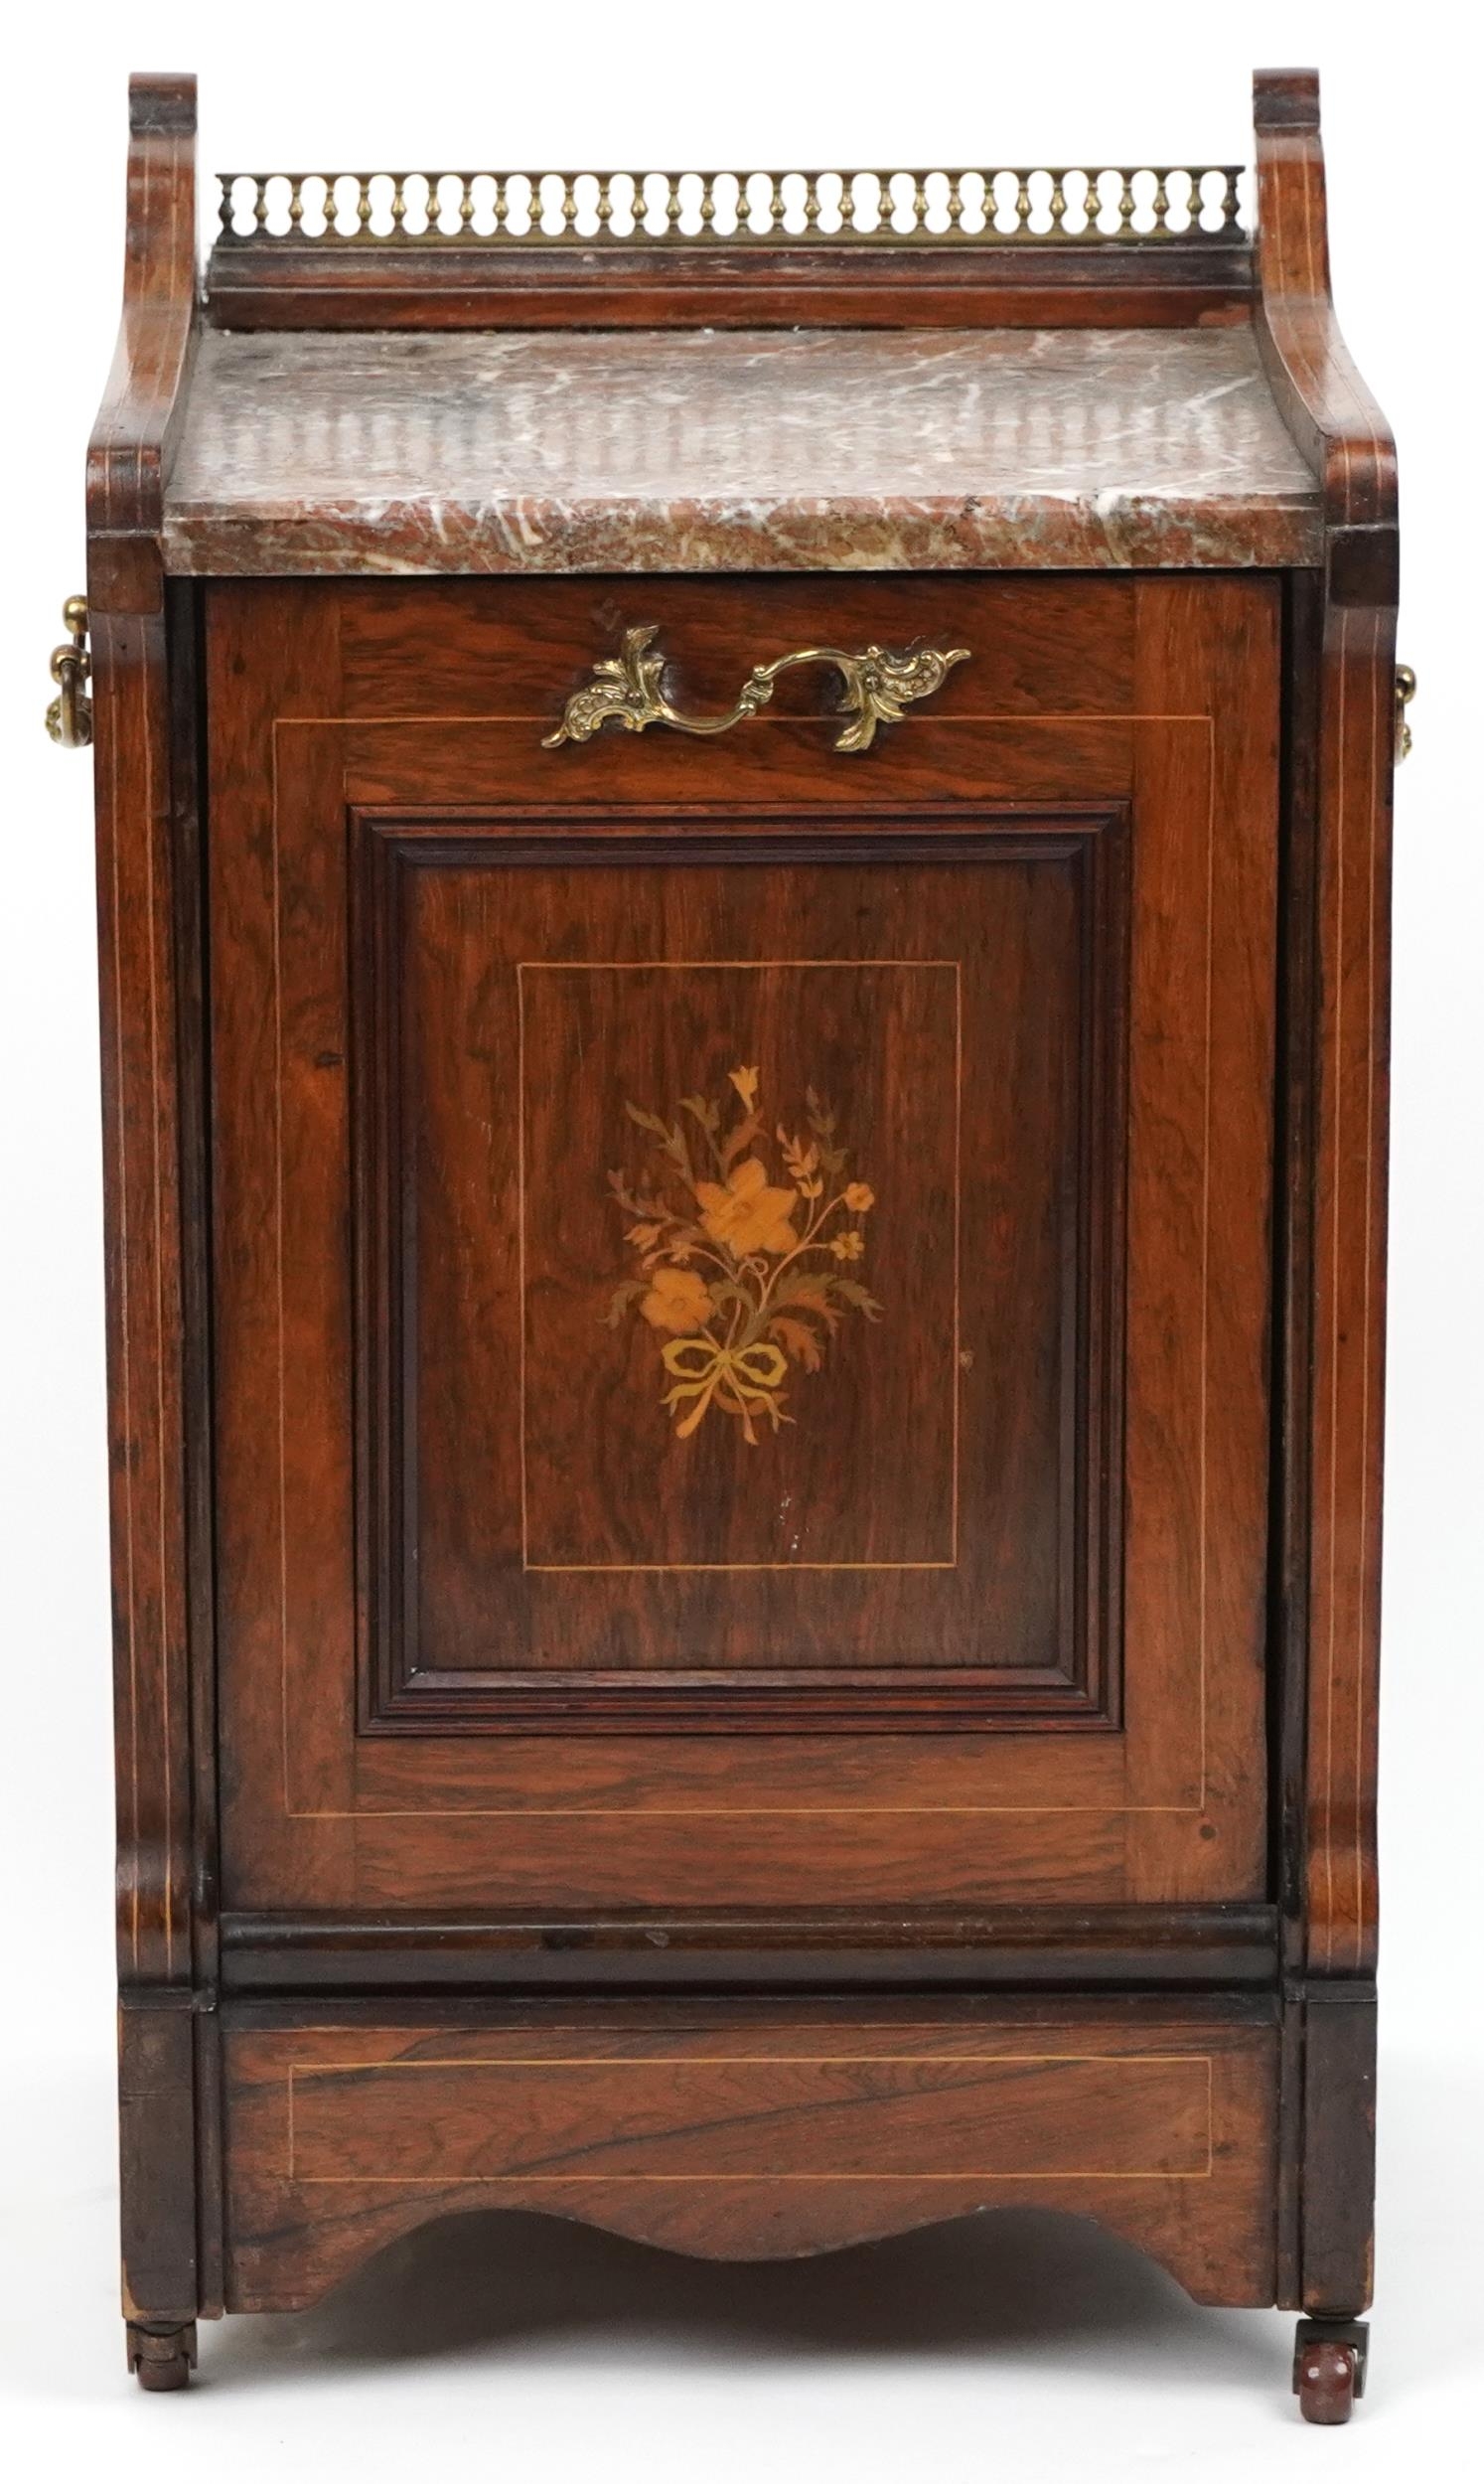 Victorian inlaid rosewood coal scuttle with marble top and brass mounts, 64cm H x 36cm W x 33.5cm D - Image 2 of 5